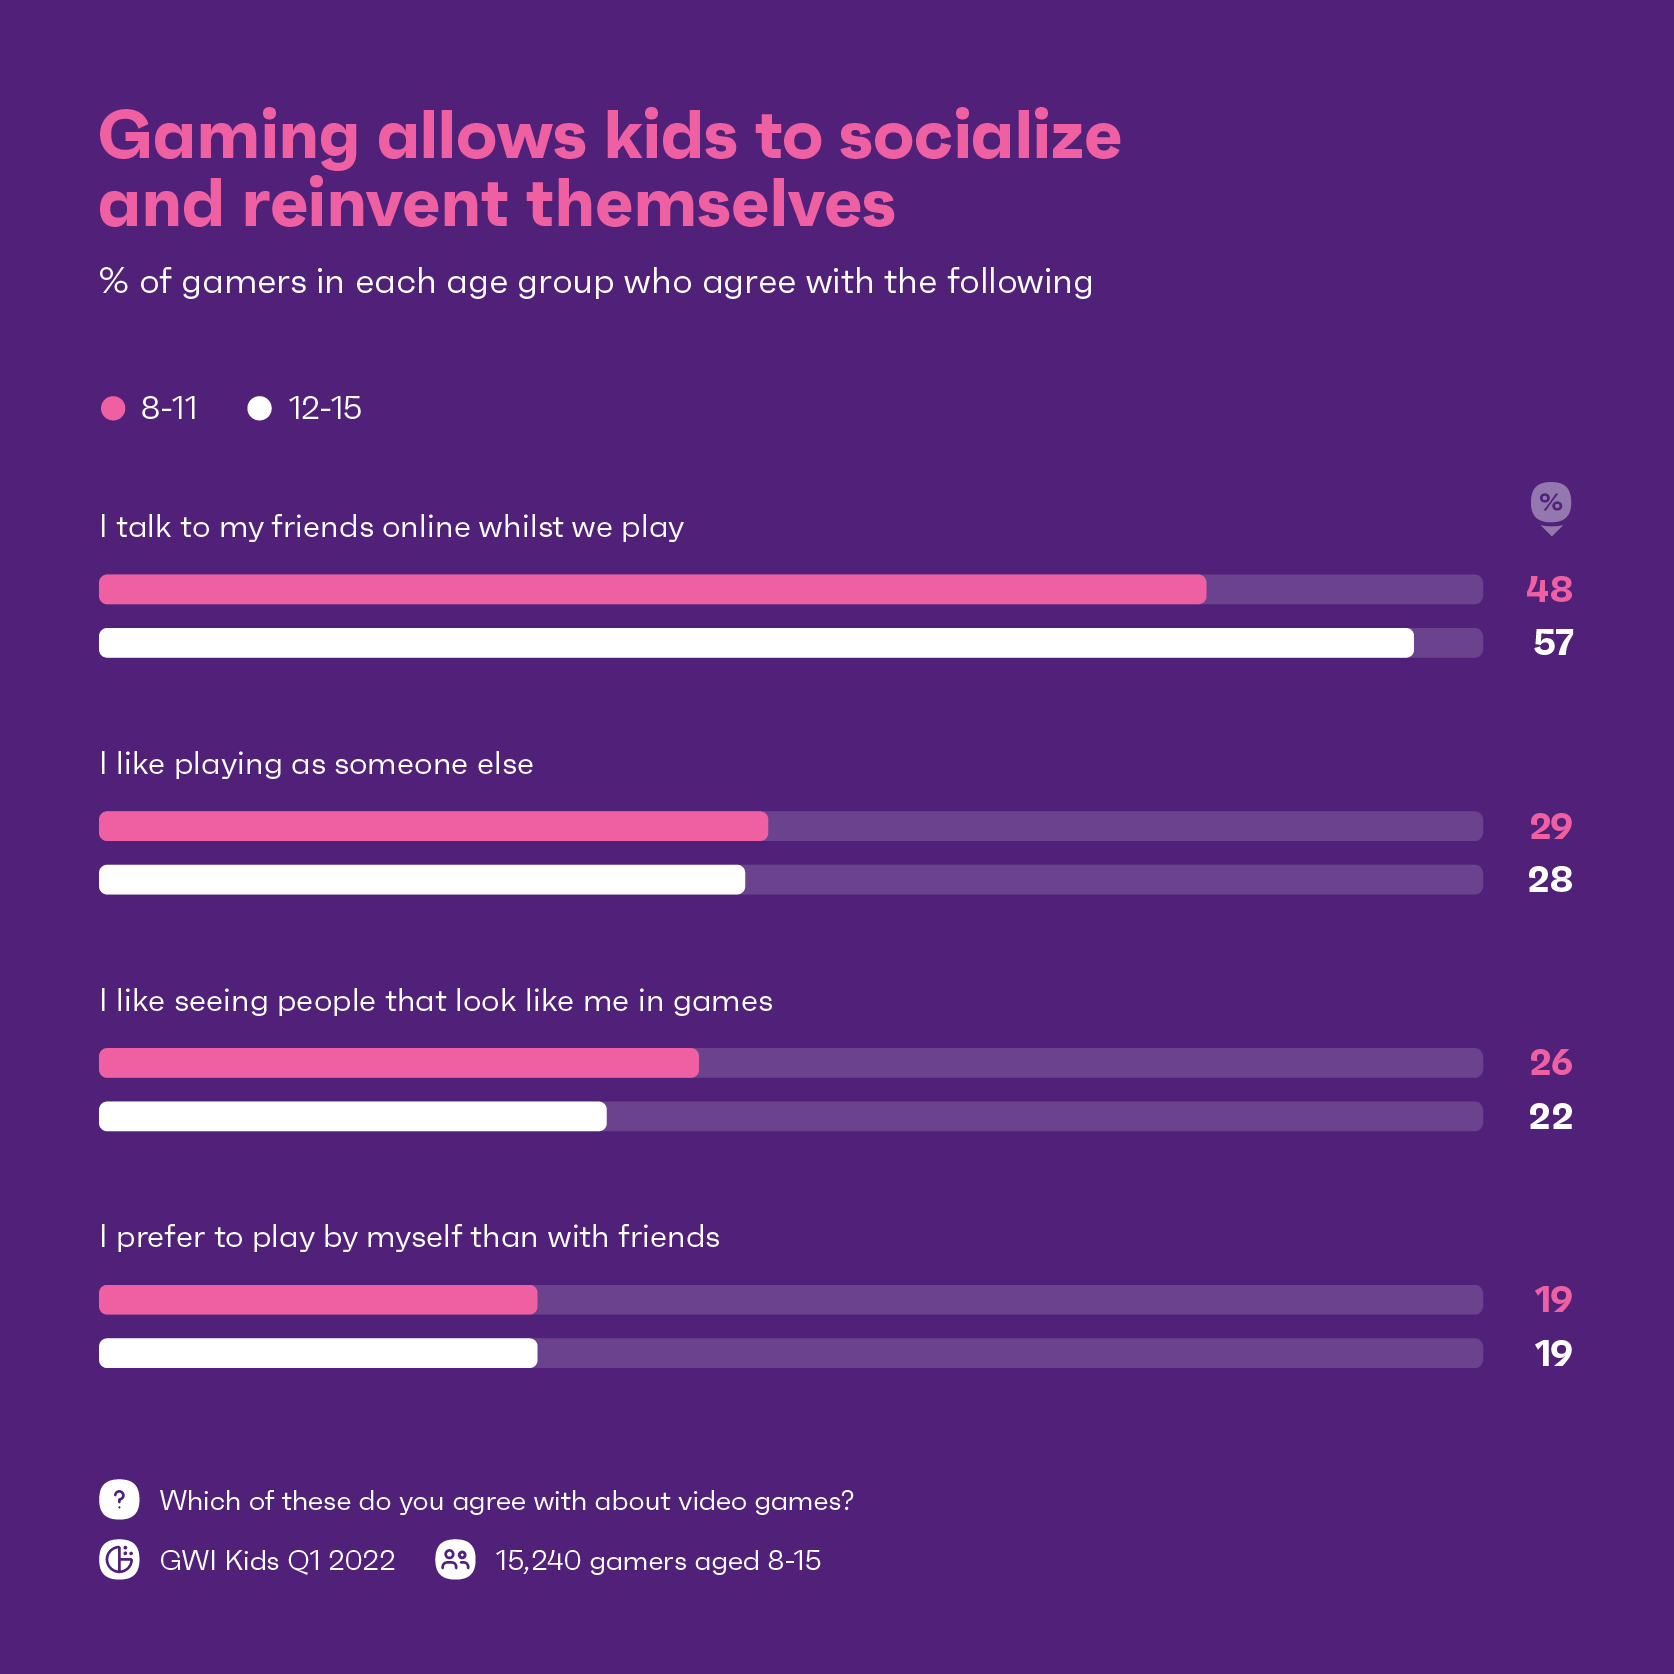 Gaming allows kids to socialize and reinvent themselves